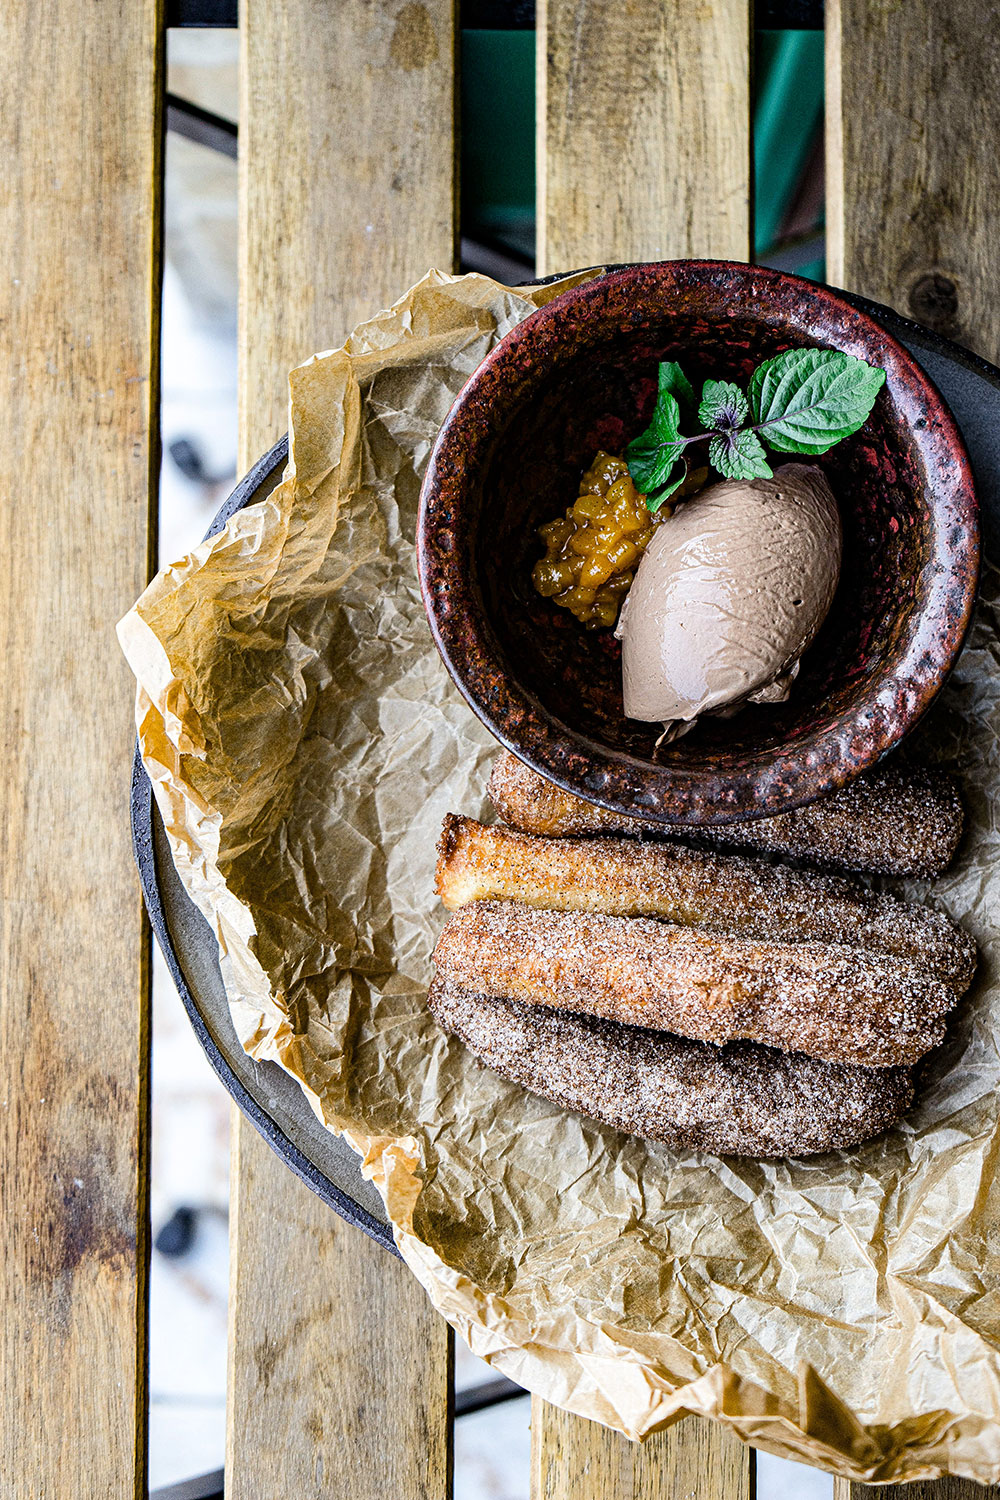 Get the recipe for churros with delicious side dishes